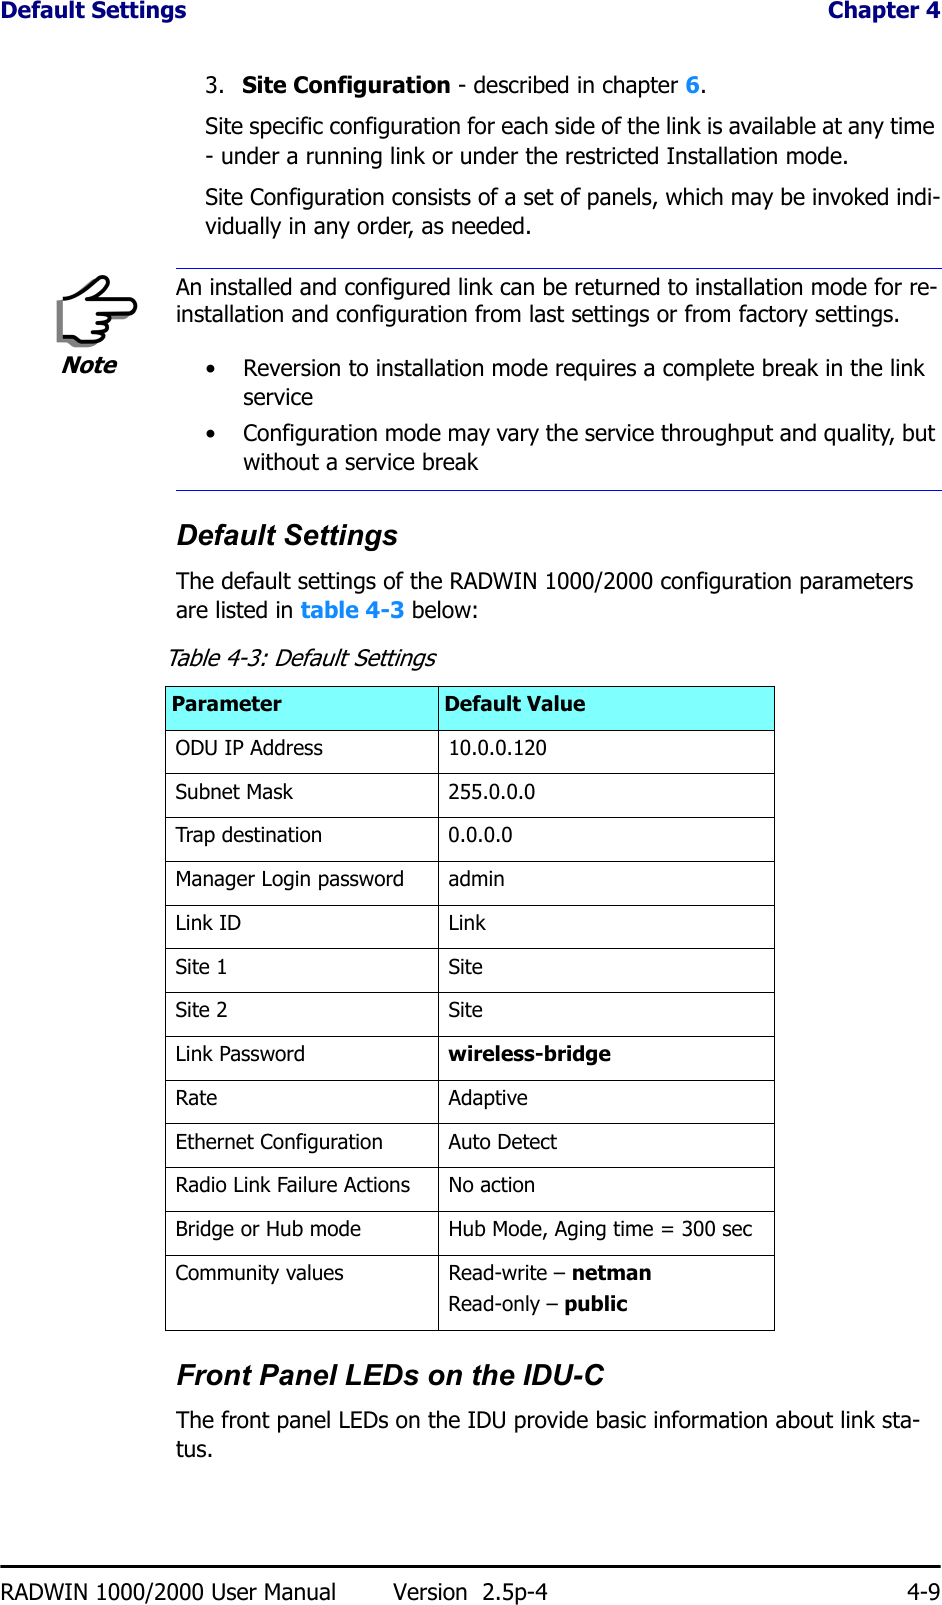 Default Settings  Chapter 4RADWIN 1000/2000 User Manual Version  2.5p-4 4-93.  Site Configuration - described in chapter 6.Site specific configuration for each side of the link is available at any time - under a running link or under the restricted Installation mode.Site Configuration consists of a set of panels, which may be invoked indi-vidually in any order, as needed.Default SettingsThe default settings of the RADWIN 1000/2000 configuration parameters are listed in table 4-3 below:Front Panel LEDs on the IDU-CThe front panel LEDs on the IDU provide basic information about link sta-tus. NoteAn installed and configured link can be returned to installation mode for re-installation and configuration from last settings or from factory settings.• Reversion to installation mode requires a complete break in the link service• Configuration mode may vary the service throughput and quality, but without a service breakTable 4-3: Default SettingsParameter Default ValueODU IP Address 10.0.0.120Subnet Mask 255.0.0.0Trap destination 0.0.0.0Manager Login password adminLink ID Link Site 1 SiteSite 2 SiteLink Password wireless-bridgeRate AdaptiveEthernet Configuration Auto DetectRadio Link Failure Actions No actionBridge or Hub mode Hub Mode, Aging time = 300 secCommunity values Read-write – netmanRead-only – public